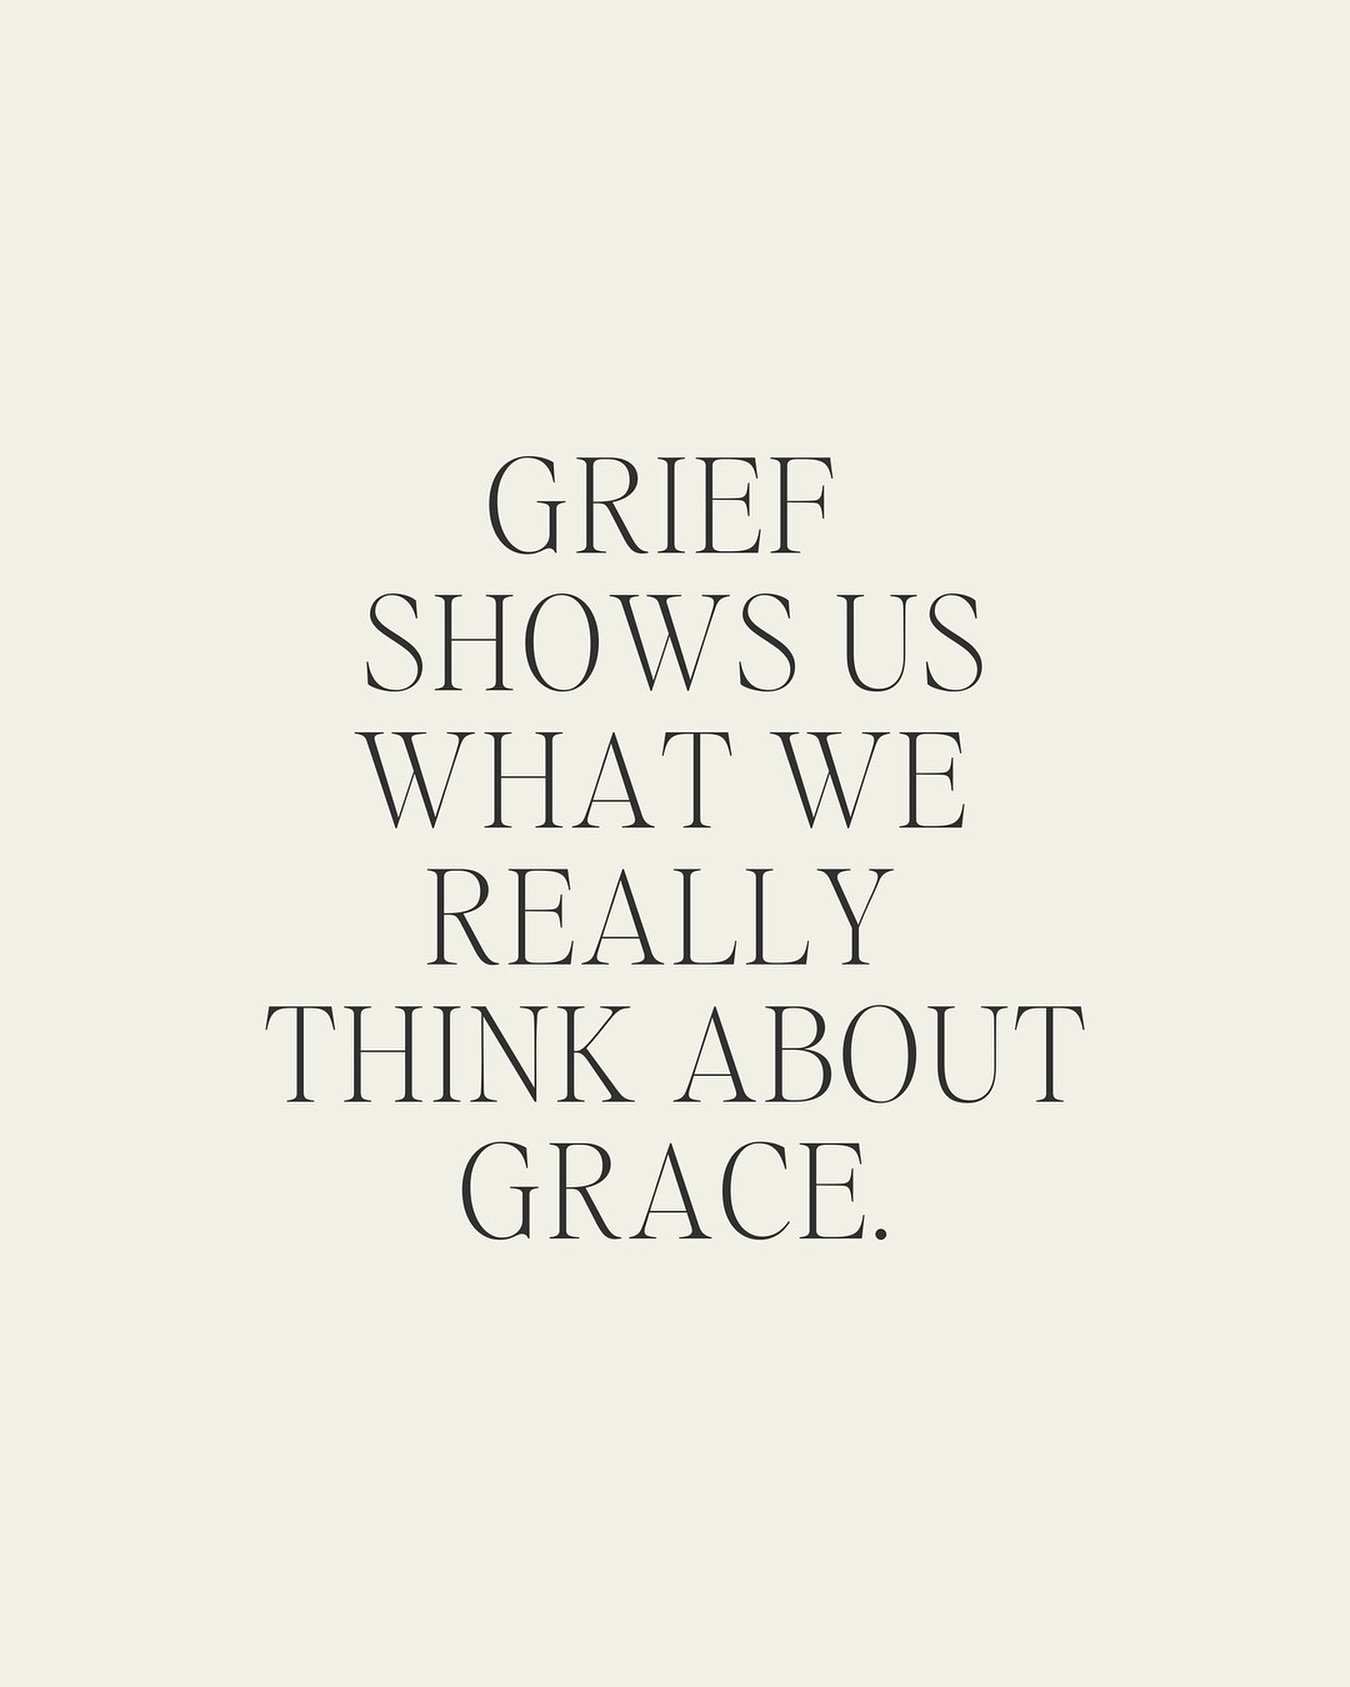 I sobbed to my friend, Kim, &ldquo;Being slammed into the rock of pain - realizing I could not pray grief away, I could not earn a miracle, taught me in a new and horrible way that grace is truly real.&rdquo;
⠀⠀⠀⠀⠀⠀⠀⠀⠀
Grief reminded me, too well, th